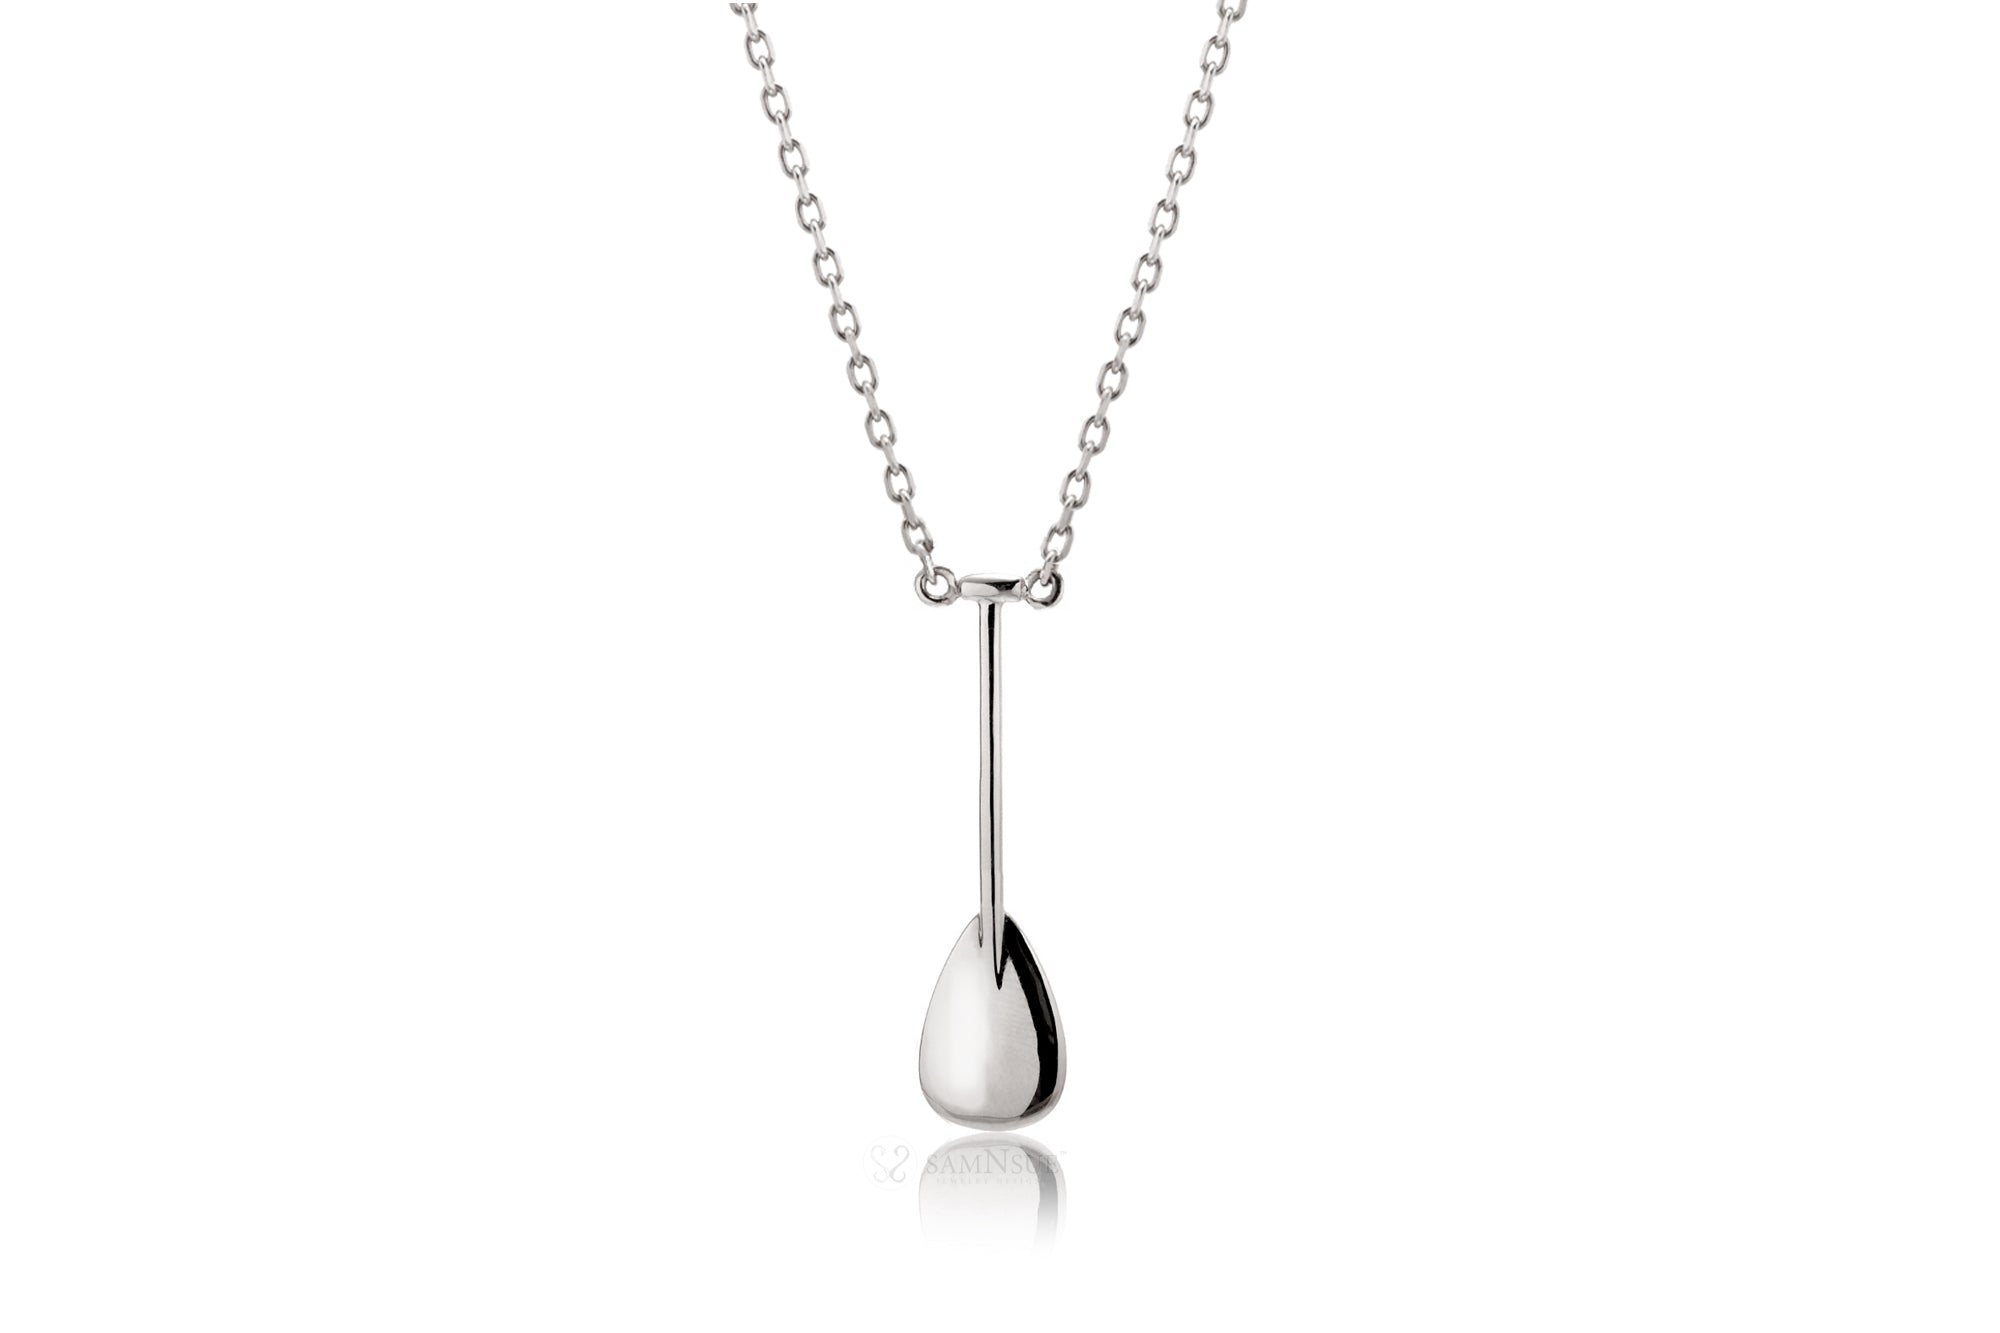 Outrigger paddle necklace in white gold